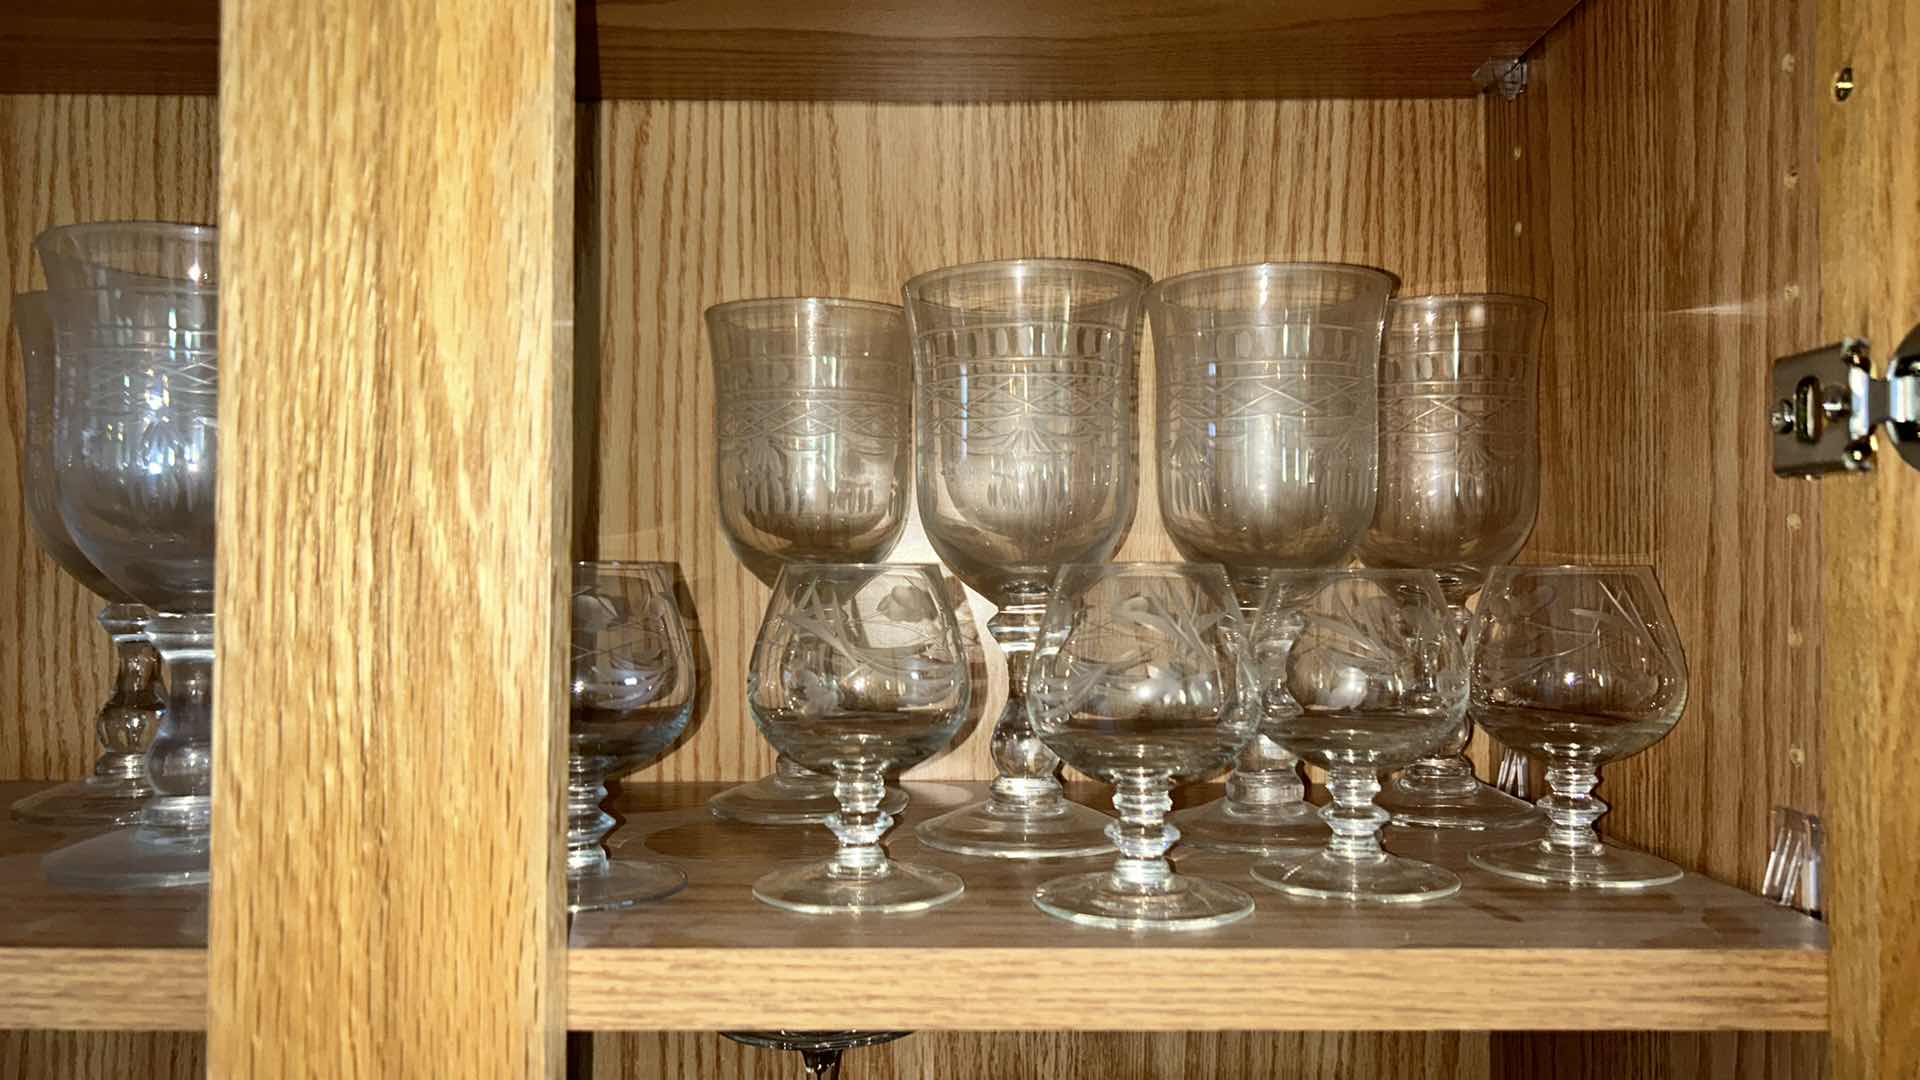 Photo 4 of CONTENTS OF CABINET- GLASSWARE STEMWARE DECANTER AND MORE